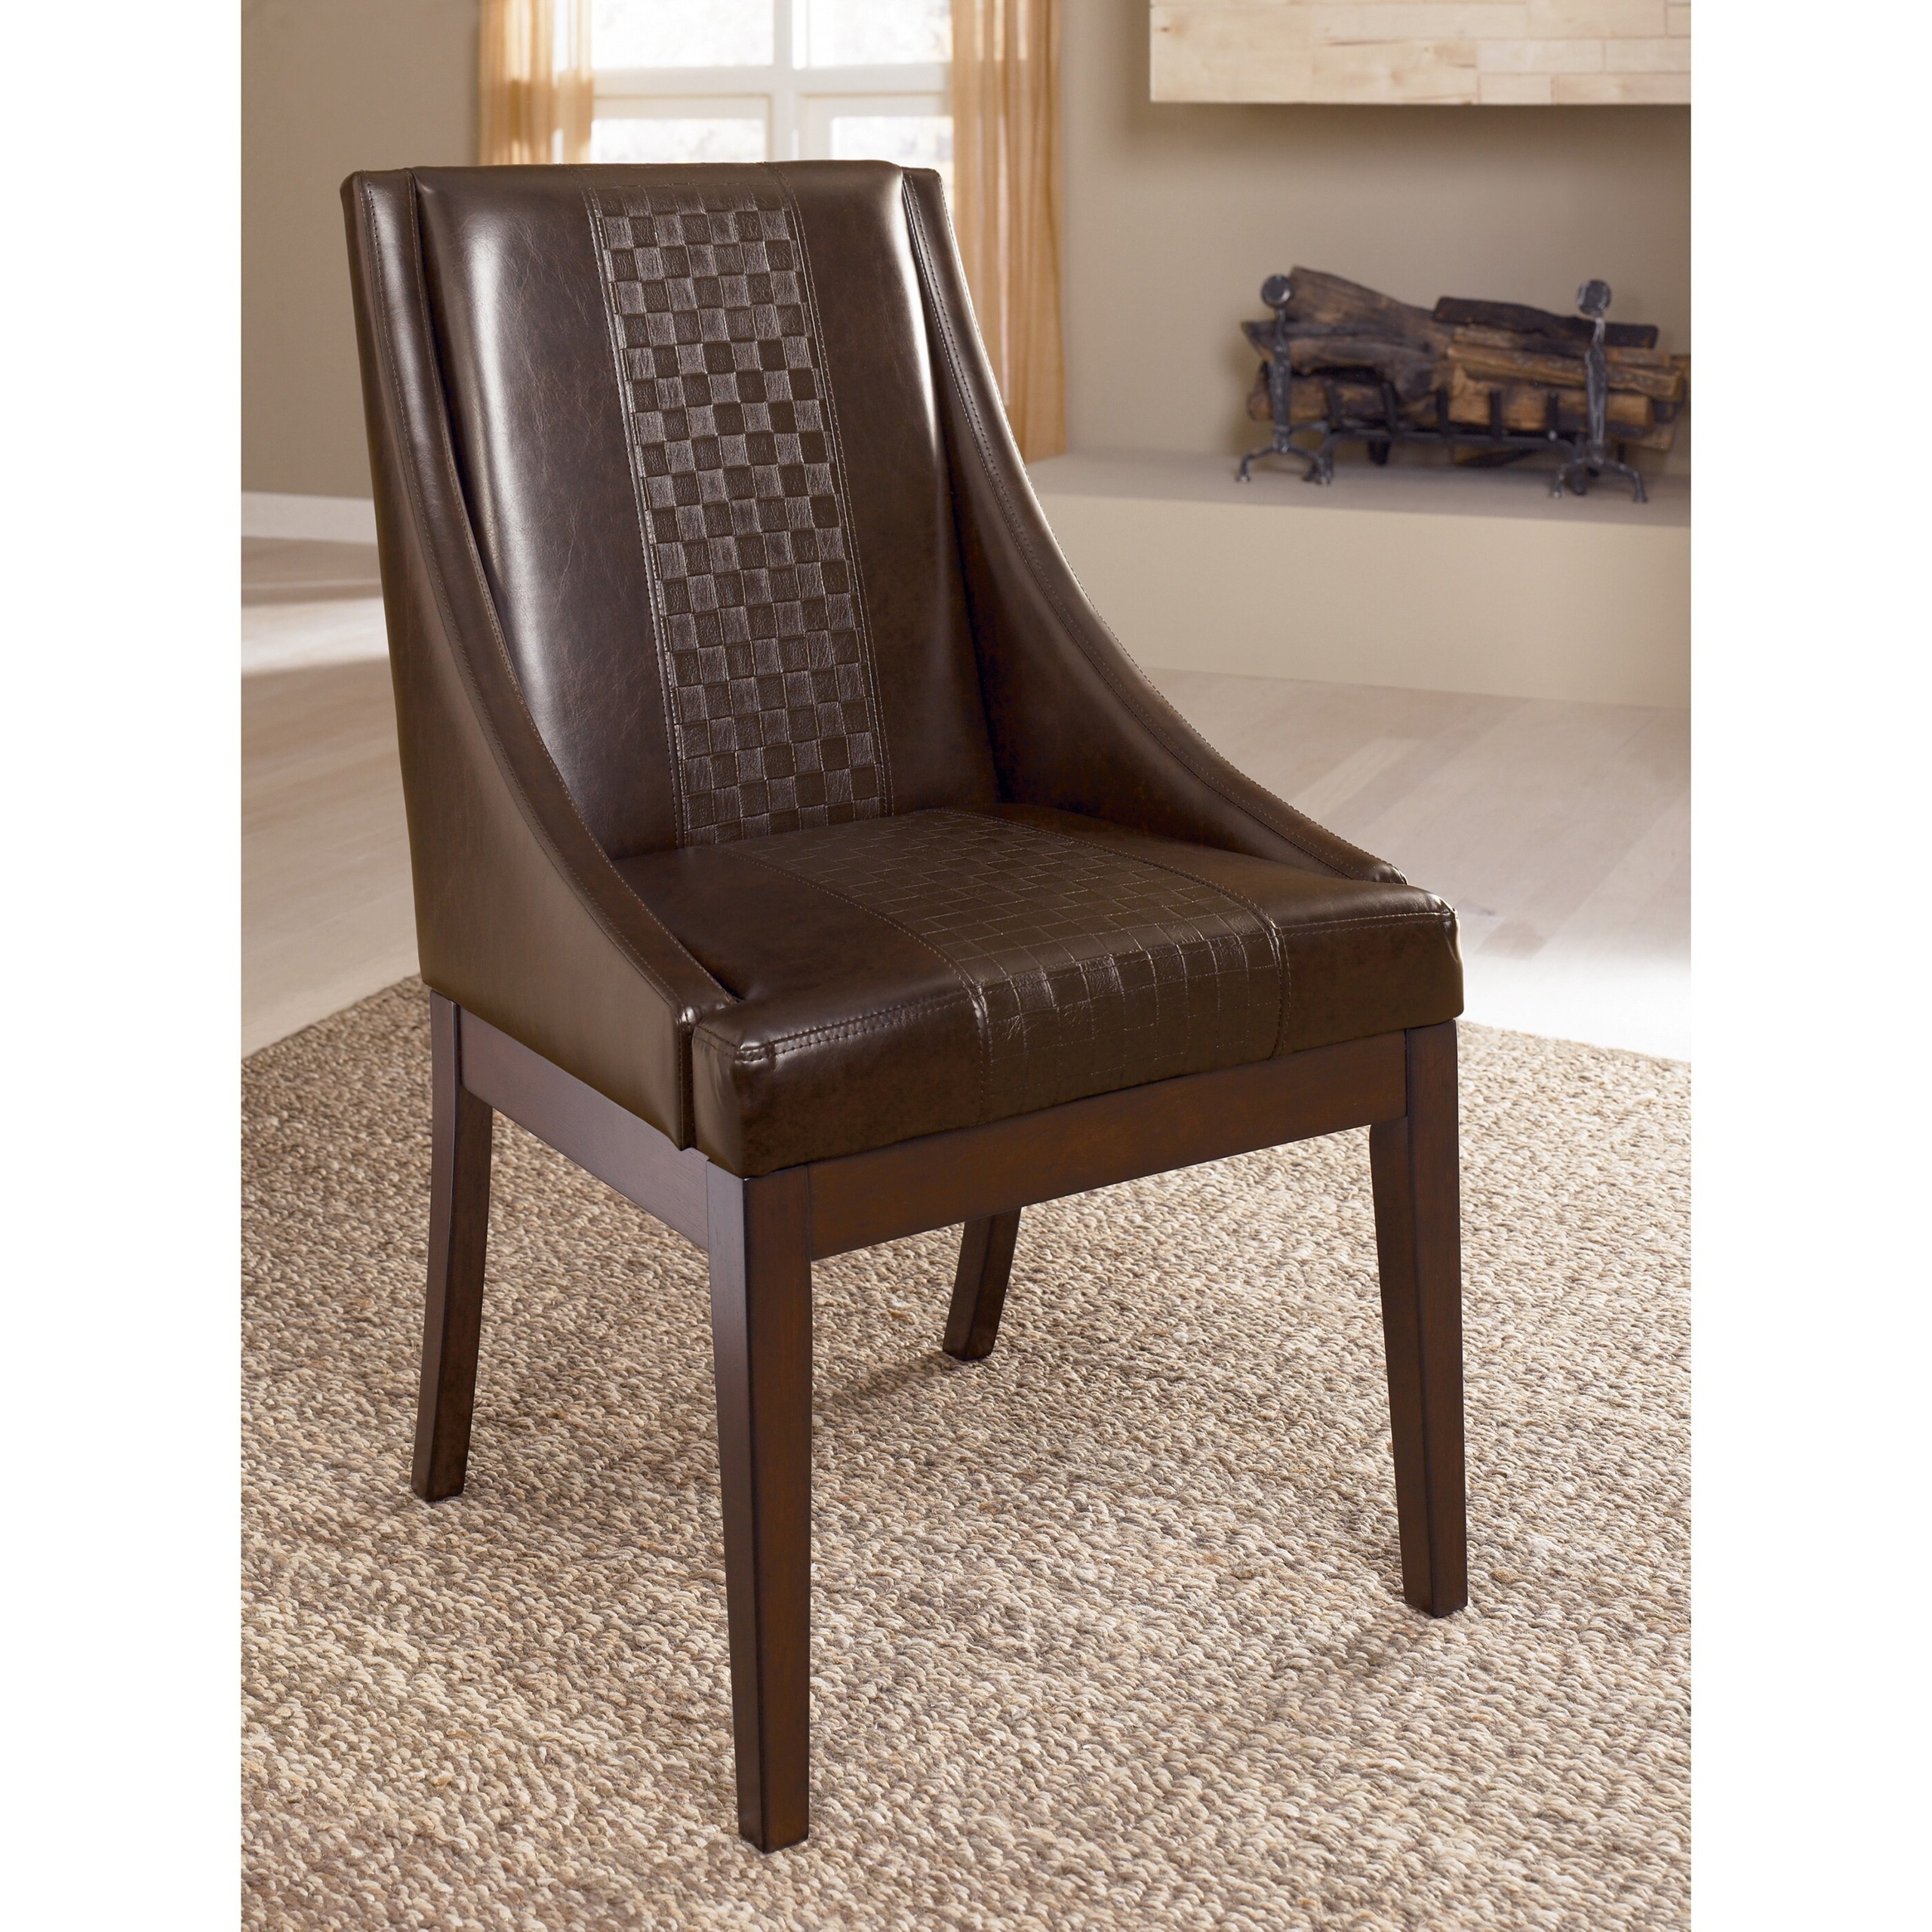 Home dining room dining arm chair holloway dining upholstered arm